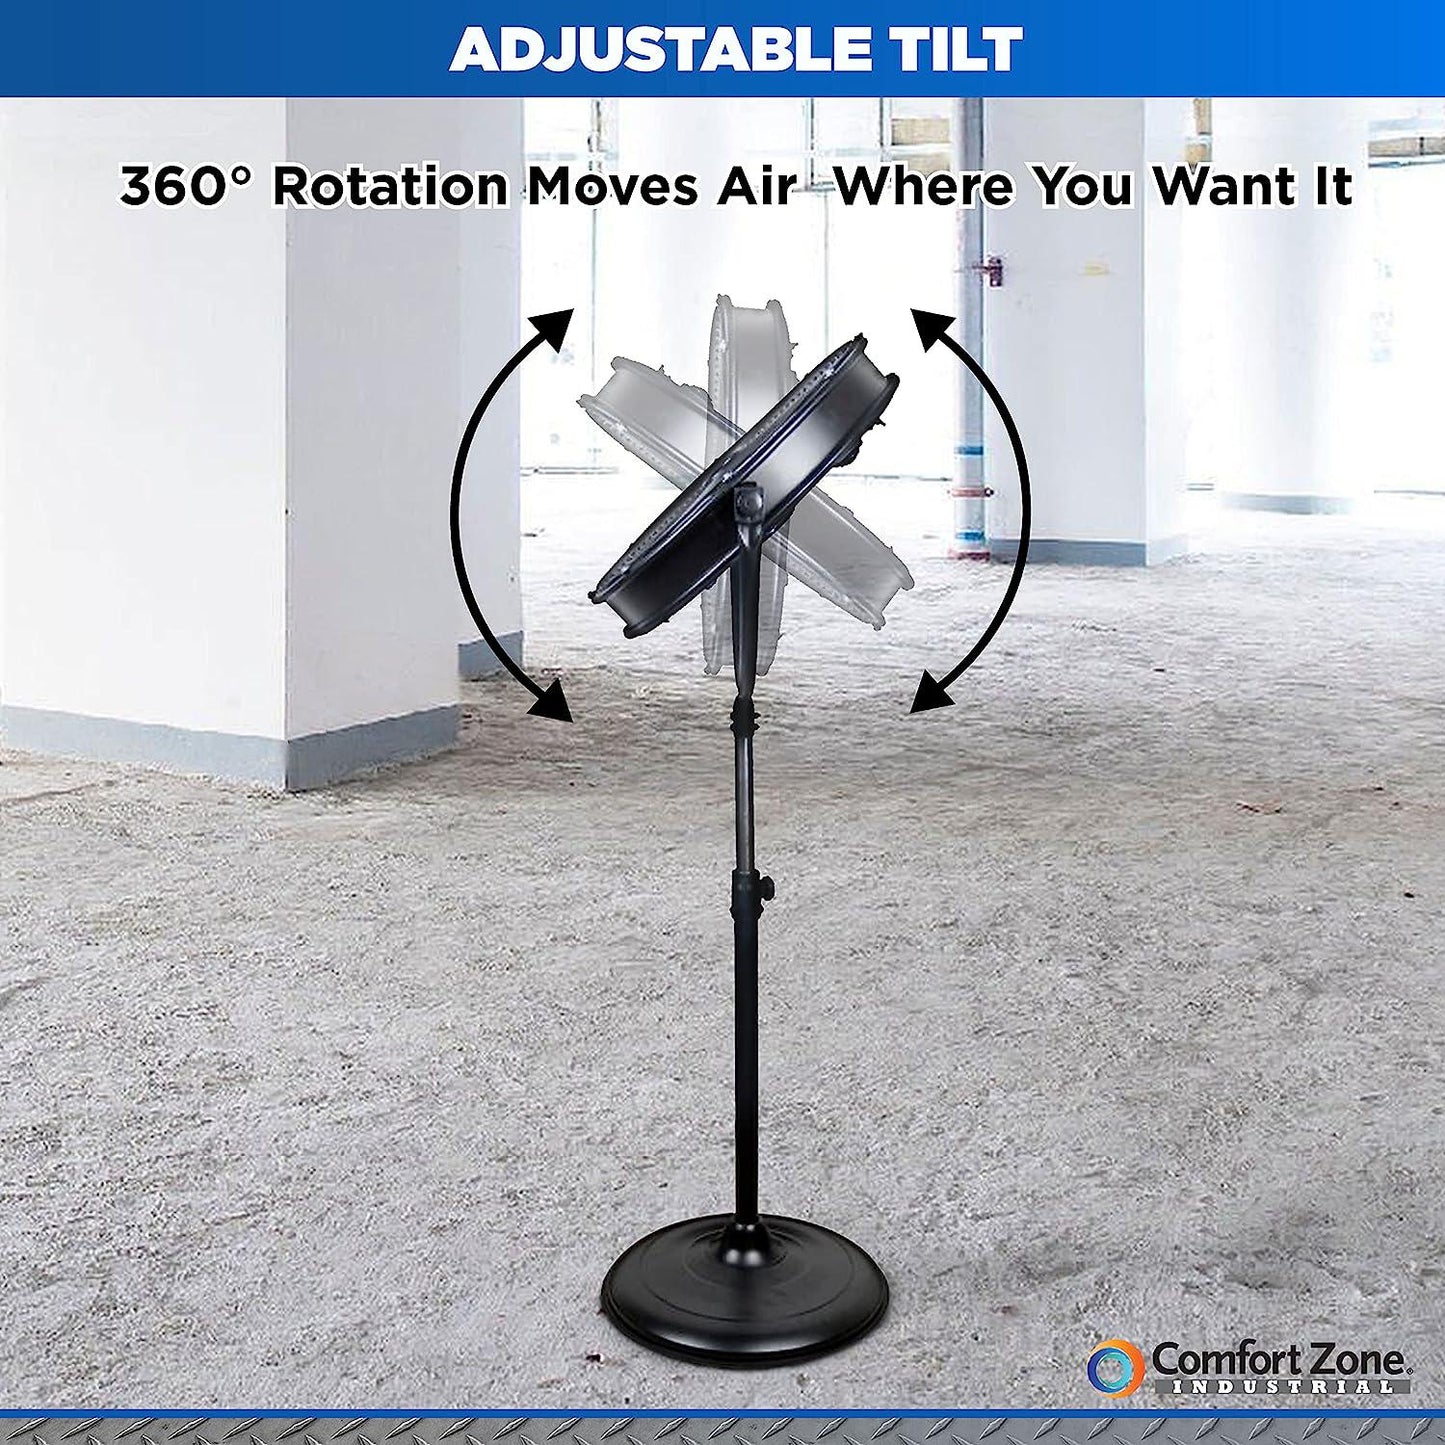 Zone CZHVP20S 20 3-Speed Slim-Profile High-Velocity Industrial Pedestal Fan with Aluminum Blades and Adjustable Tilt, All-Metal Construction, Black